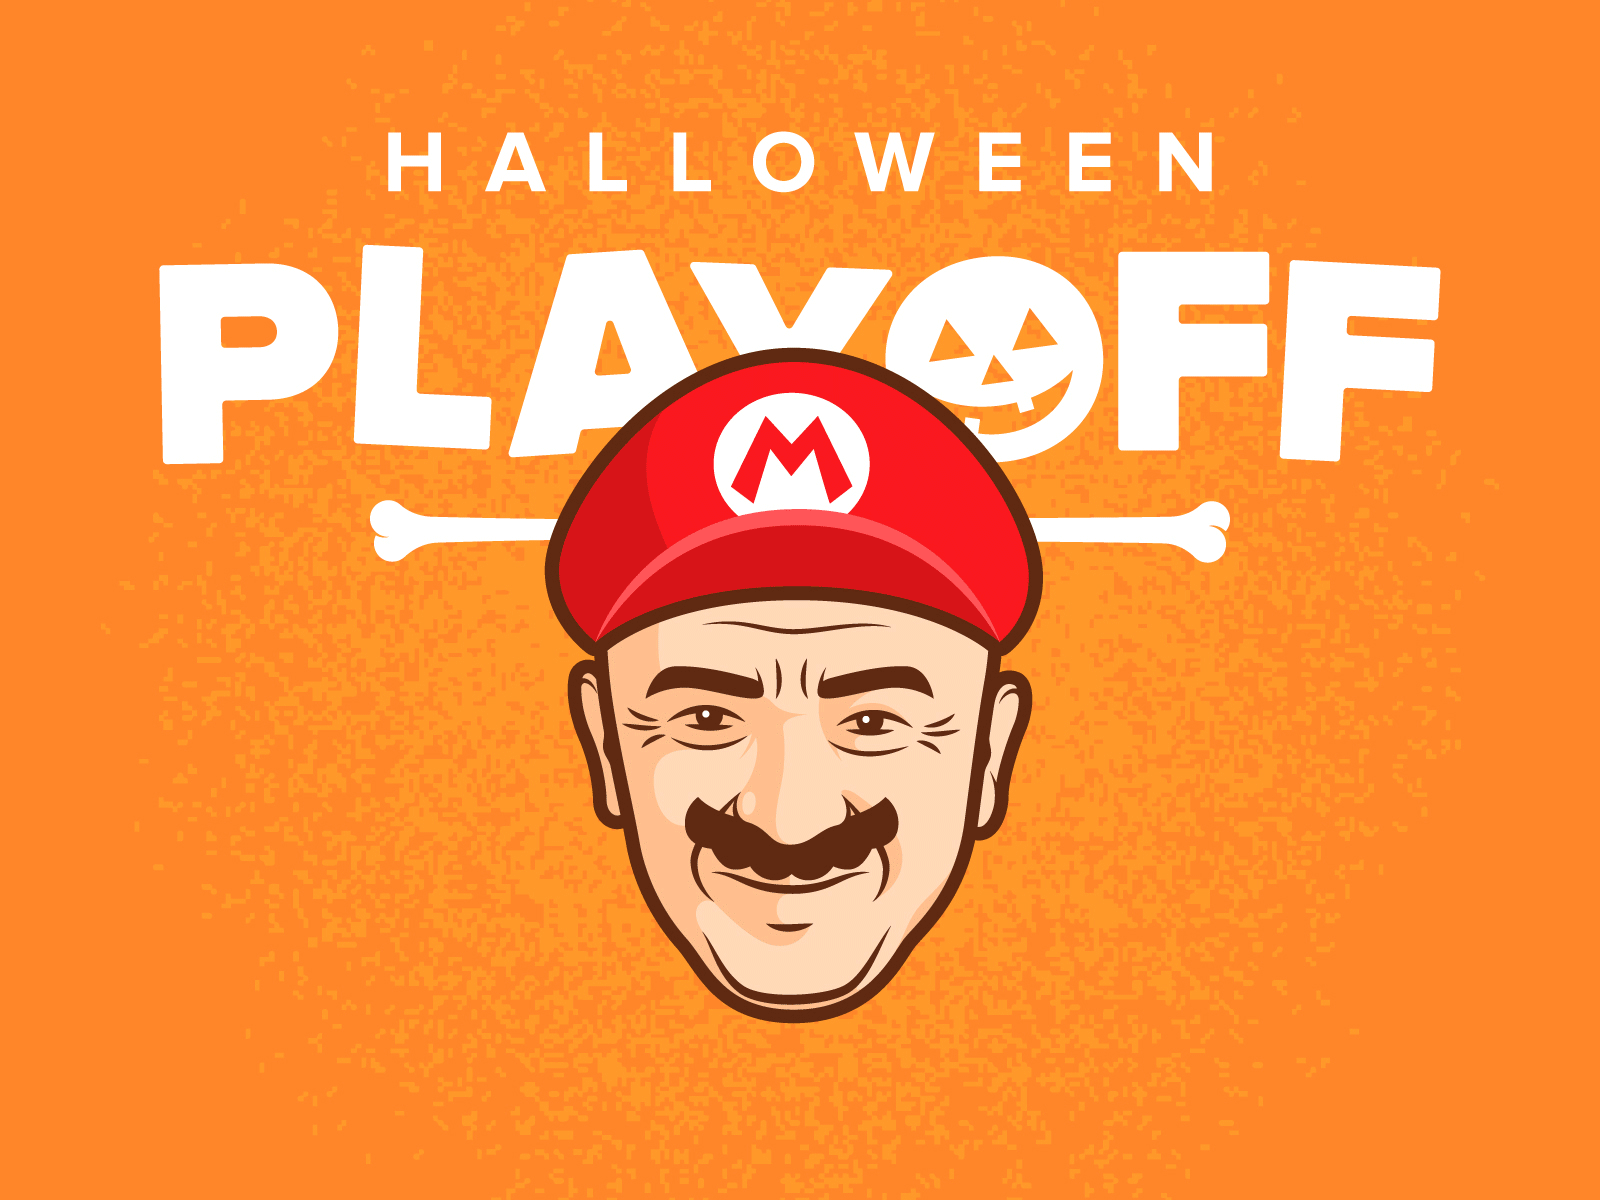 Halloween playoff! Costume inspiration needed contest costume custom stickers giveaway halloween playoff rebound sticker mule stickers